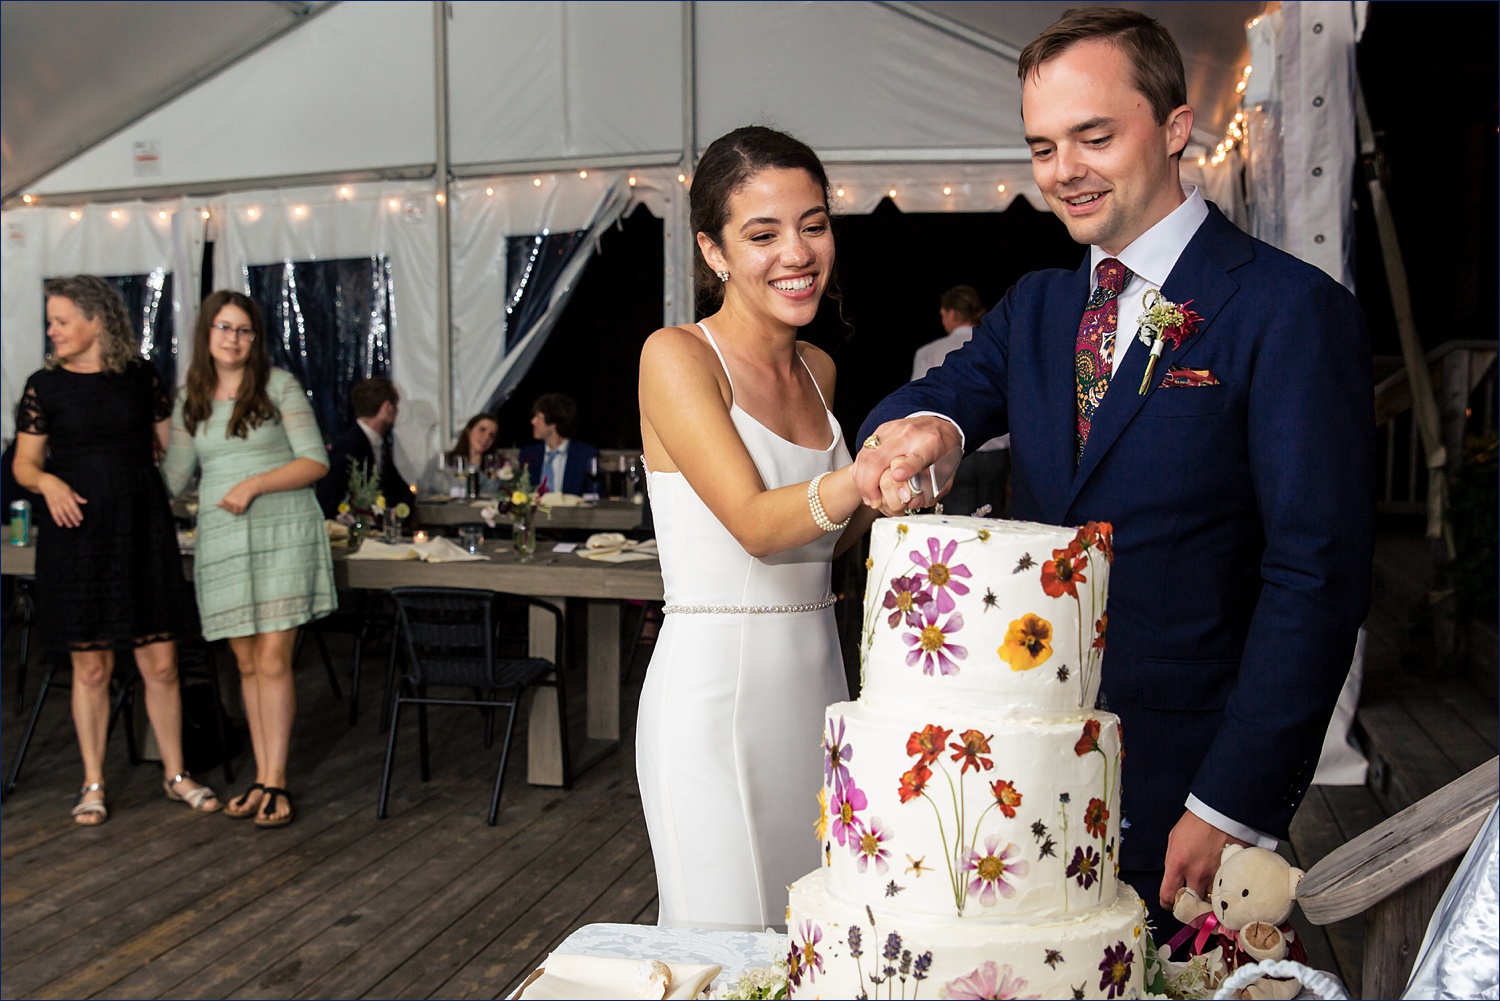 The newlyweds attempt to cut the cake on their coastal Maine wedding day